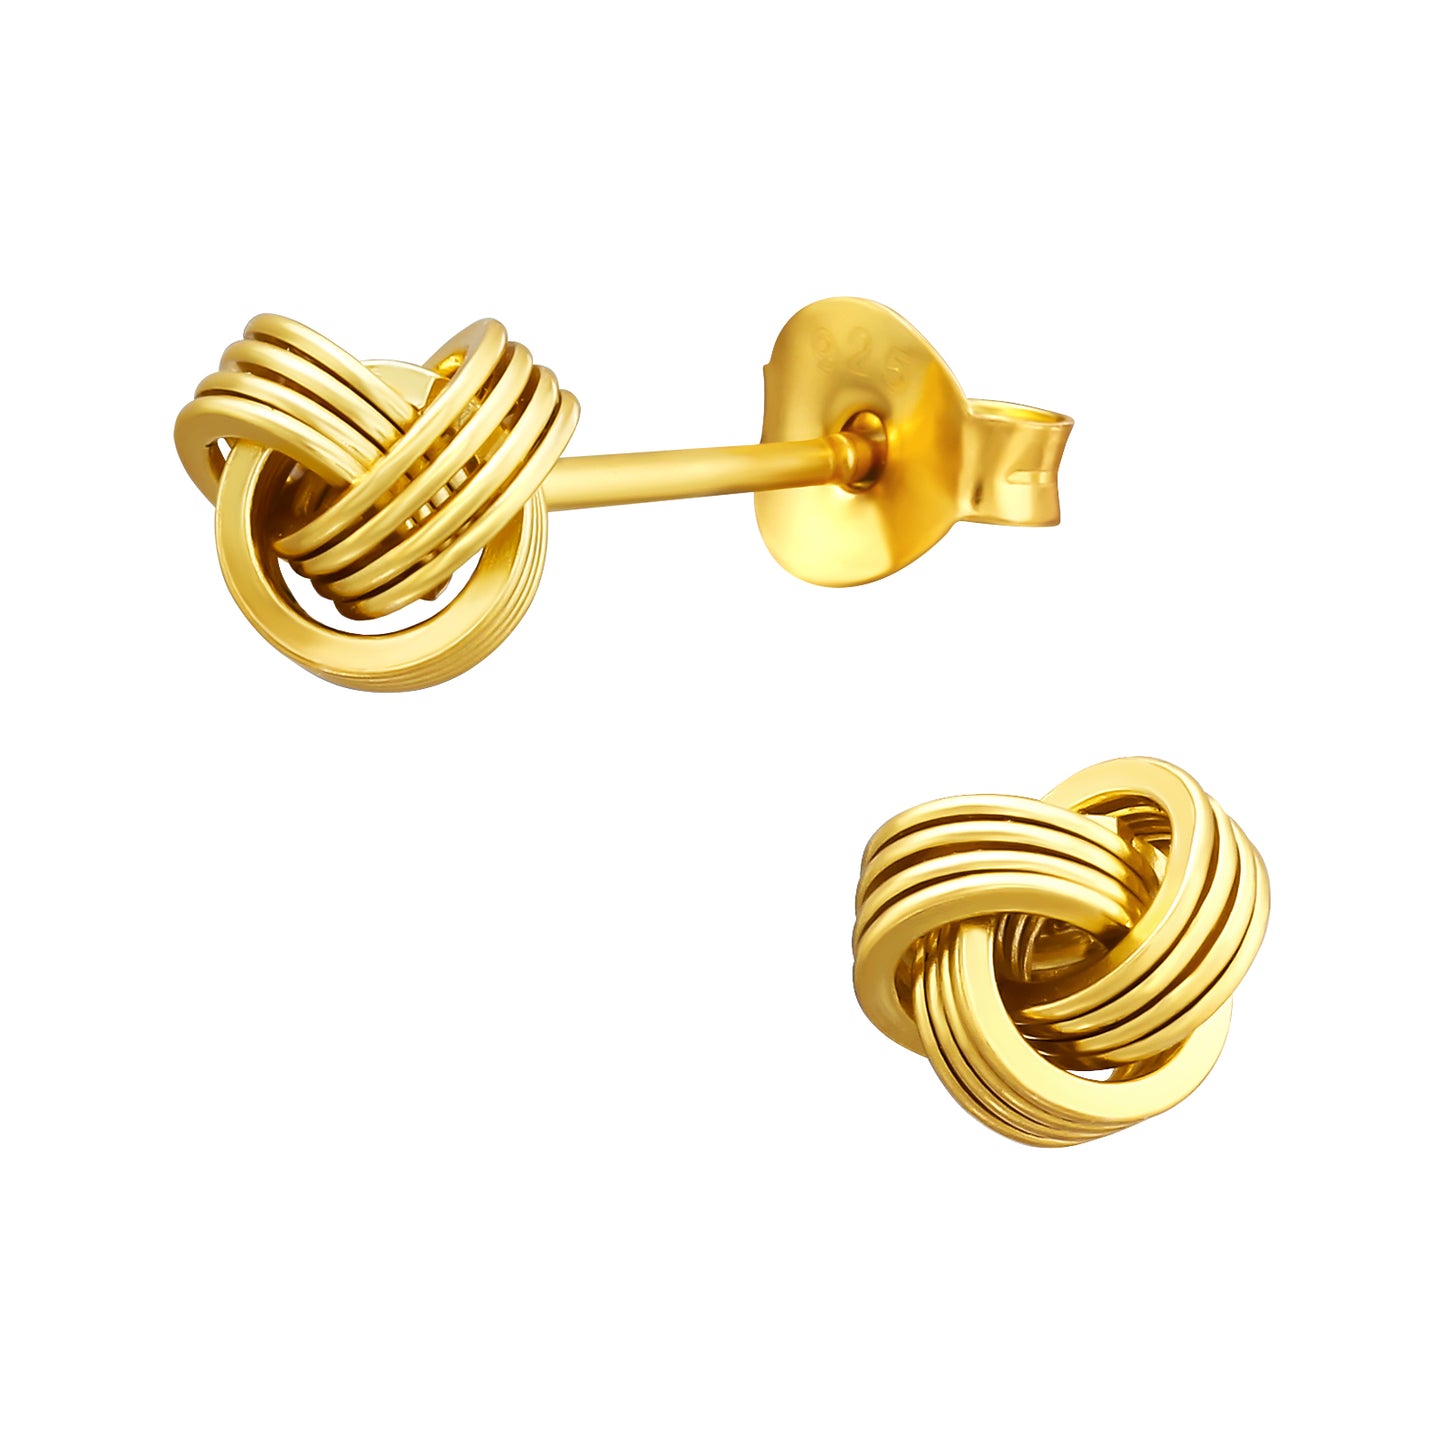 Knot Stud Earrings - Pair - Gold Plated 925 Sterling Silver